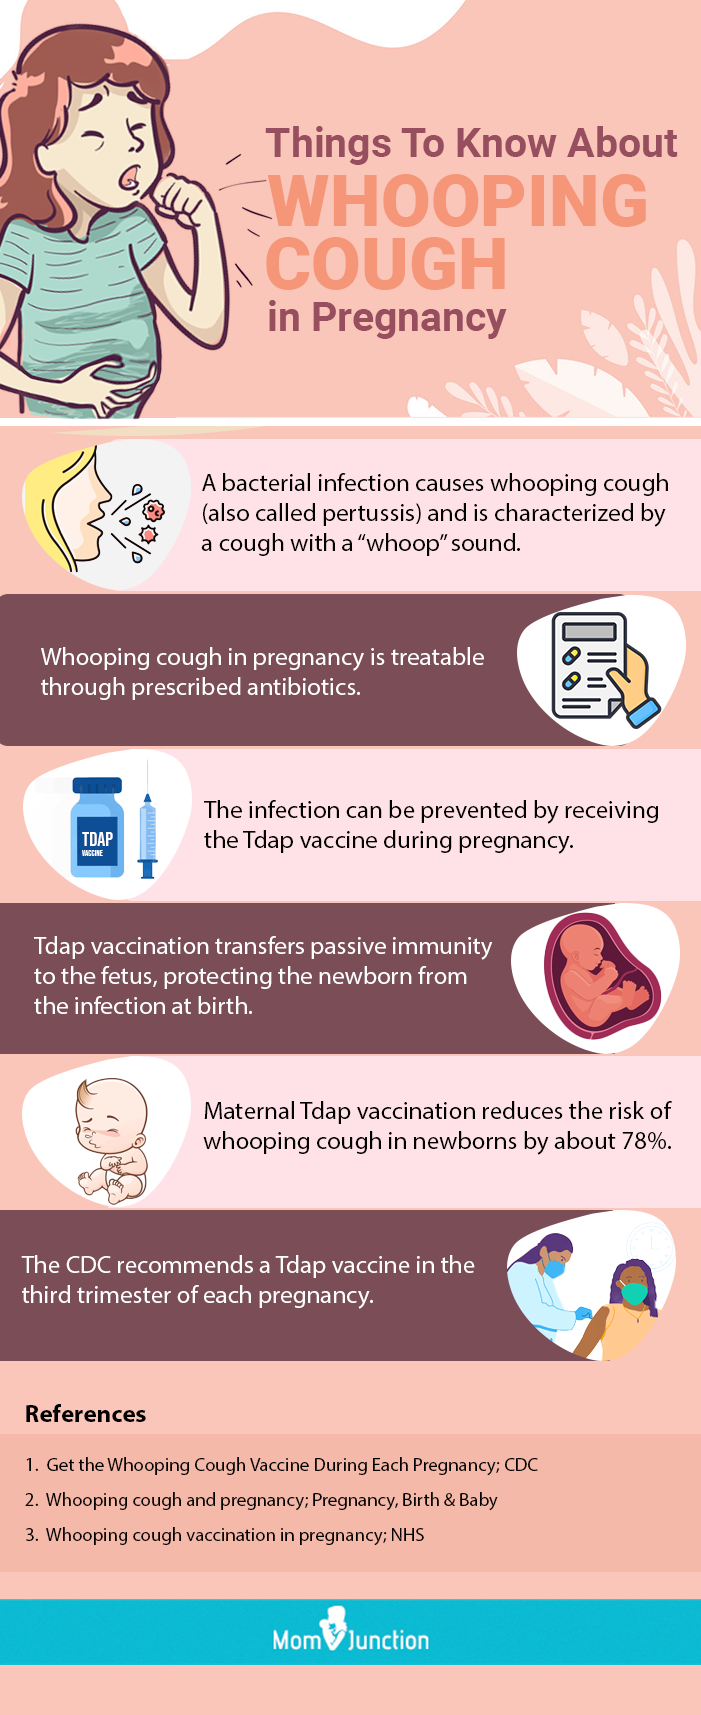 cough and cold in pregnancy is it safe treatment options during each trimester when to see a doctor